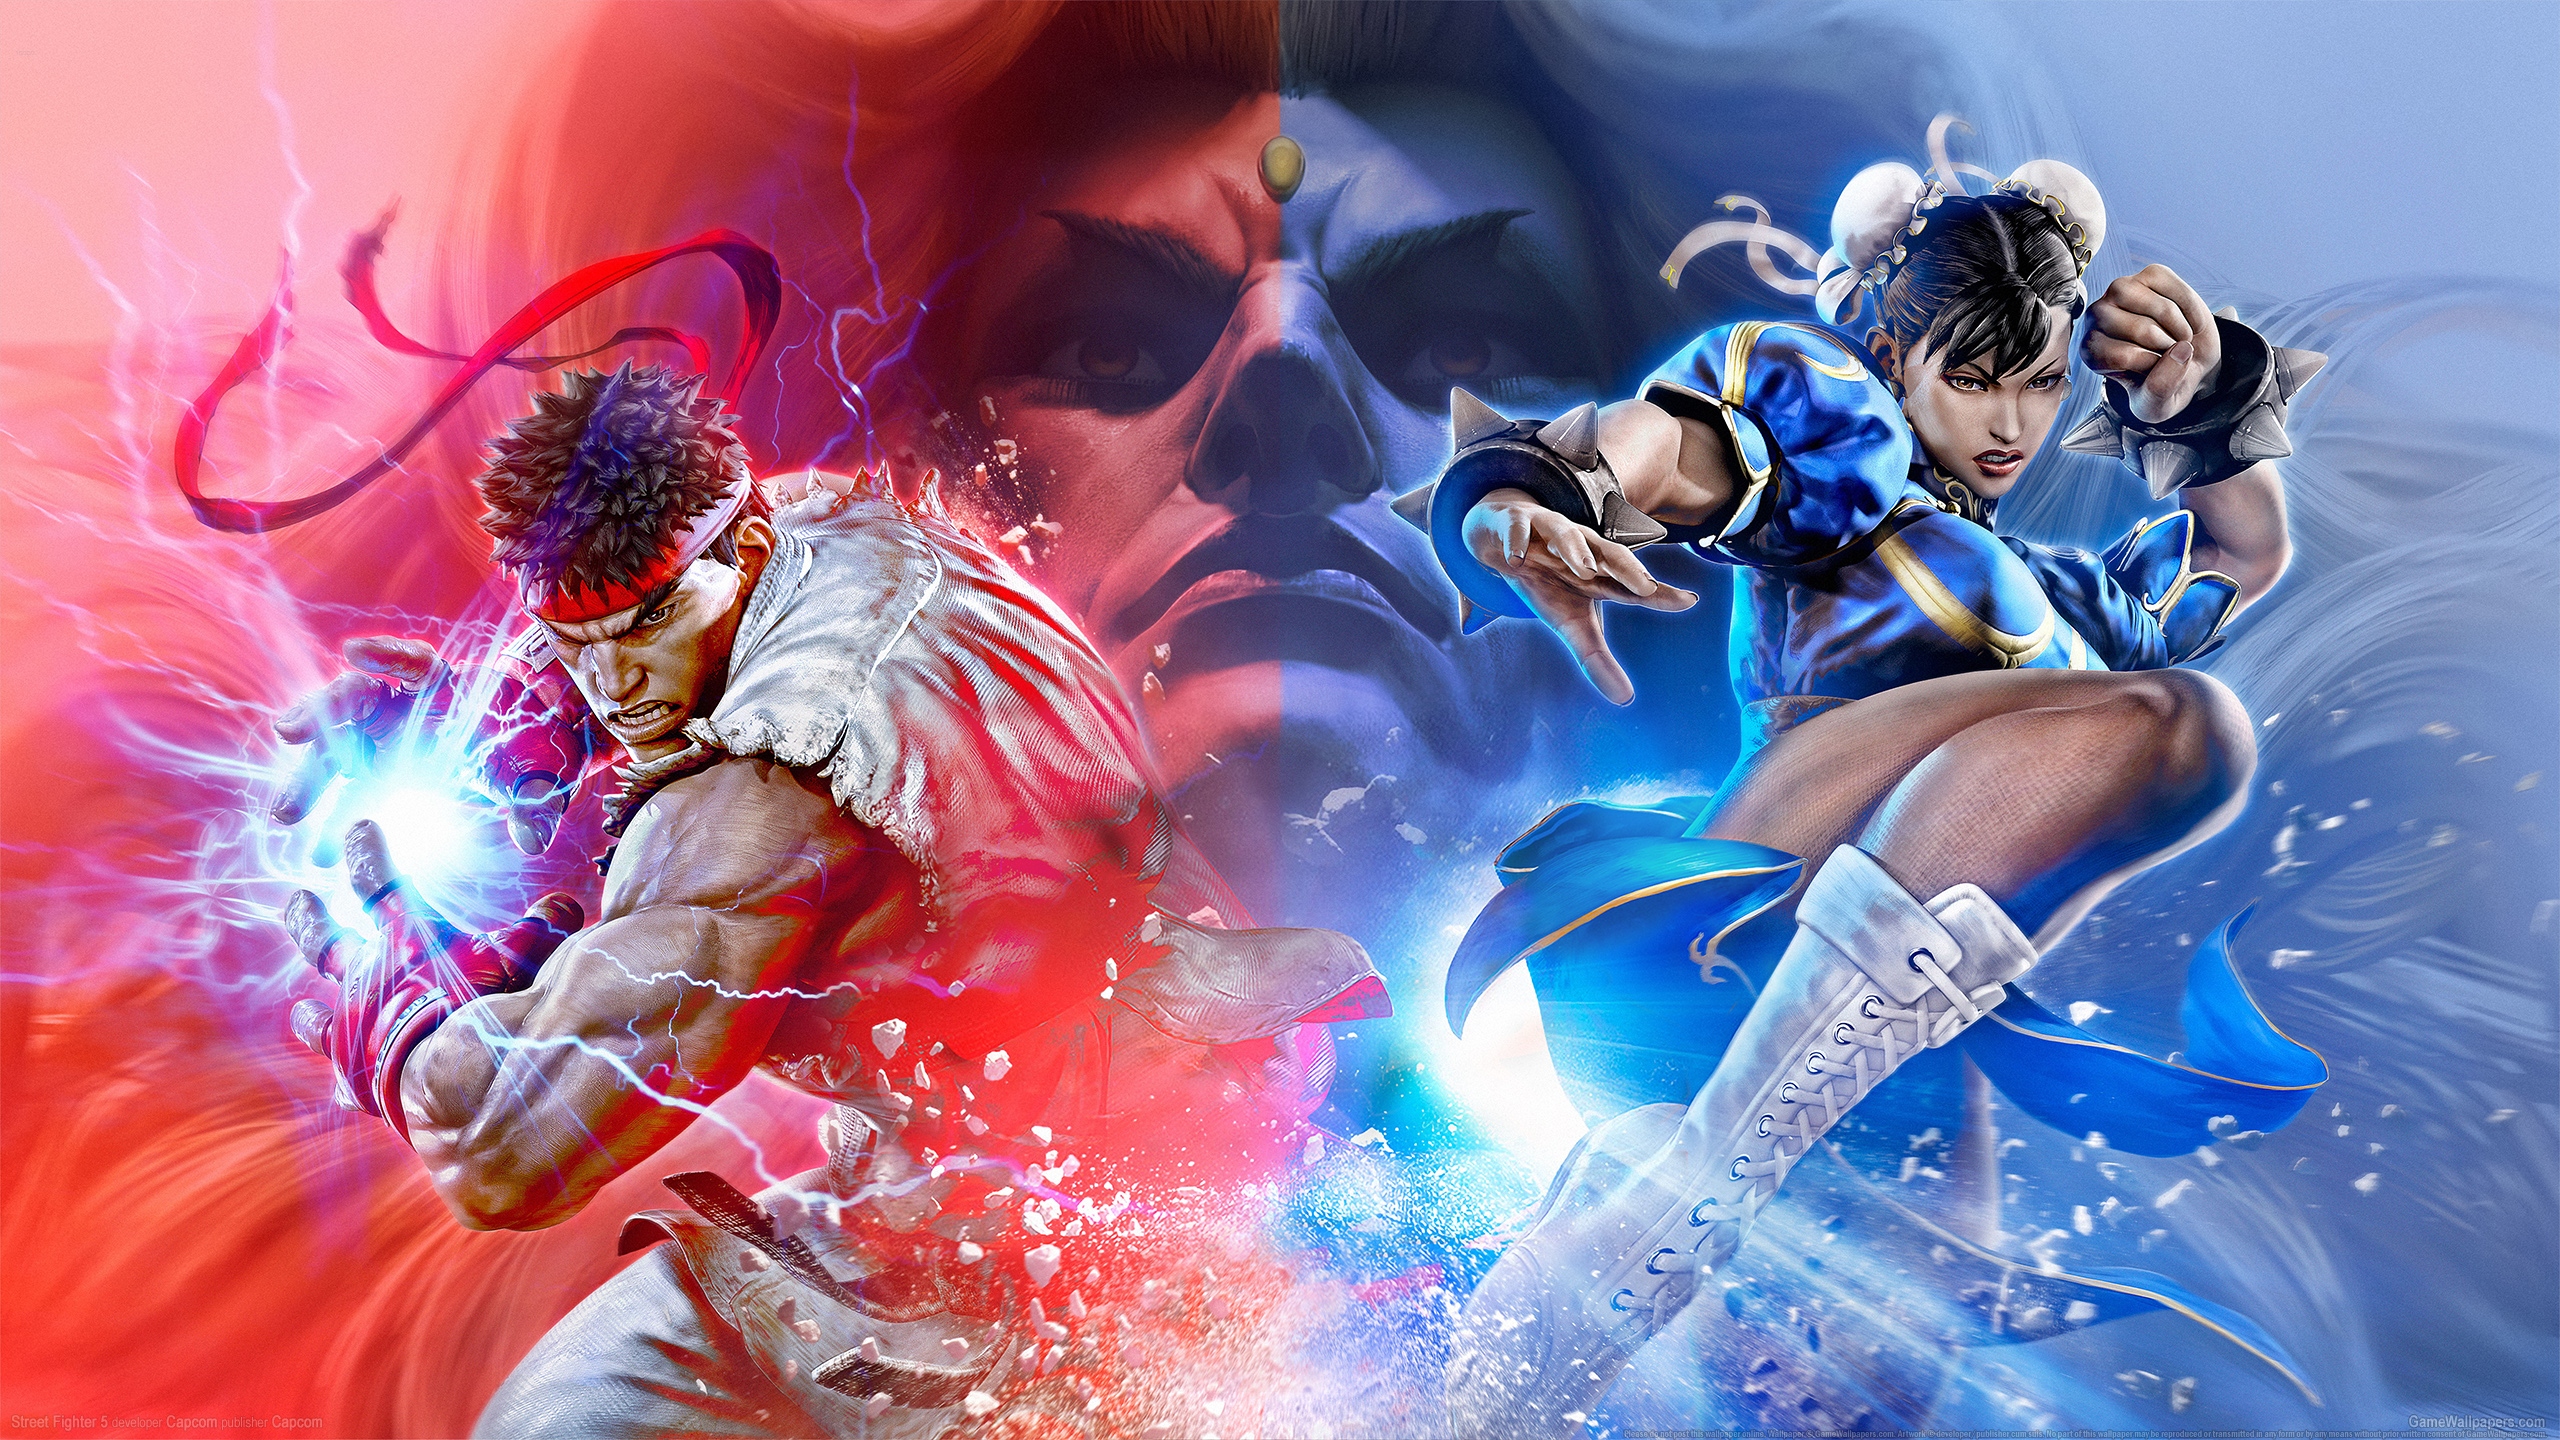 Street Fighter 5 2560x1440 wallpaper or background 08